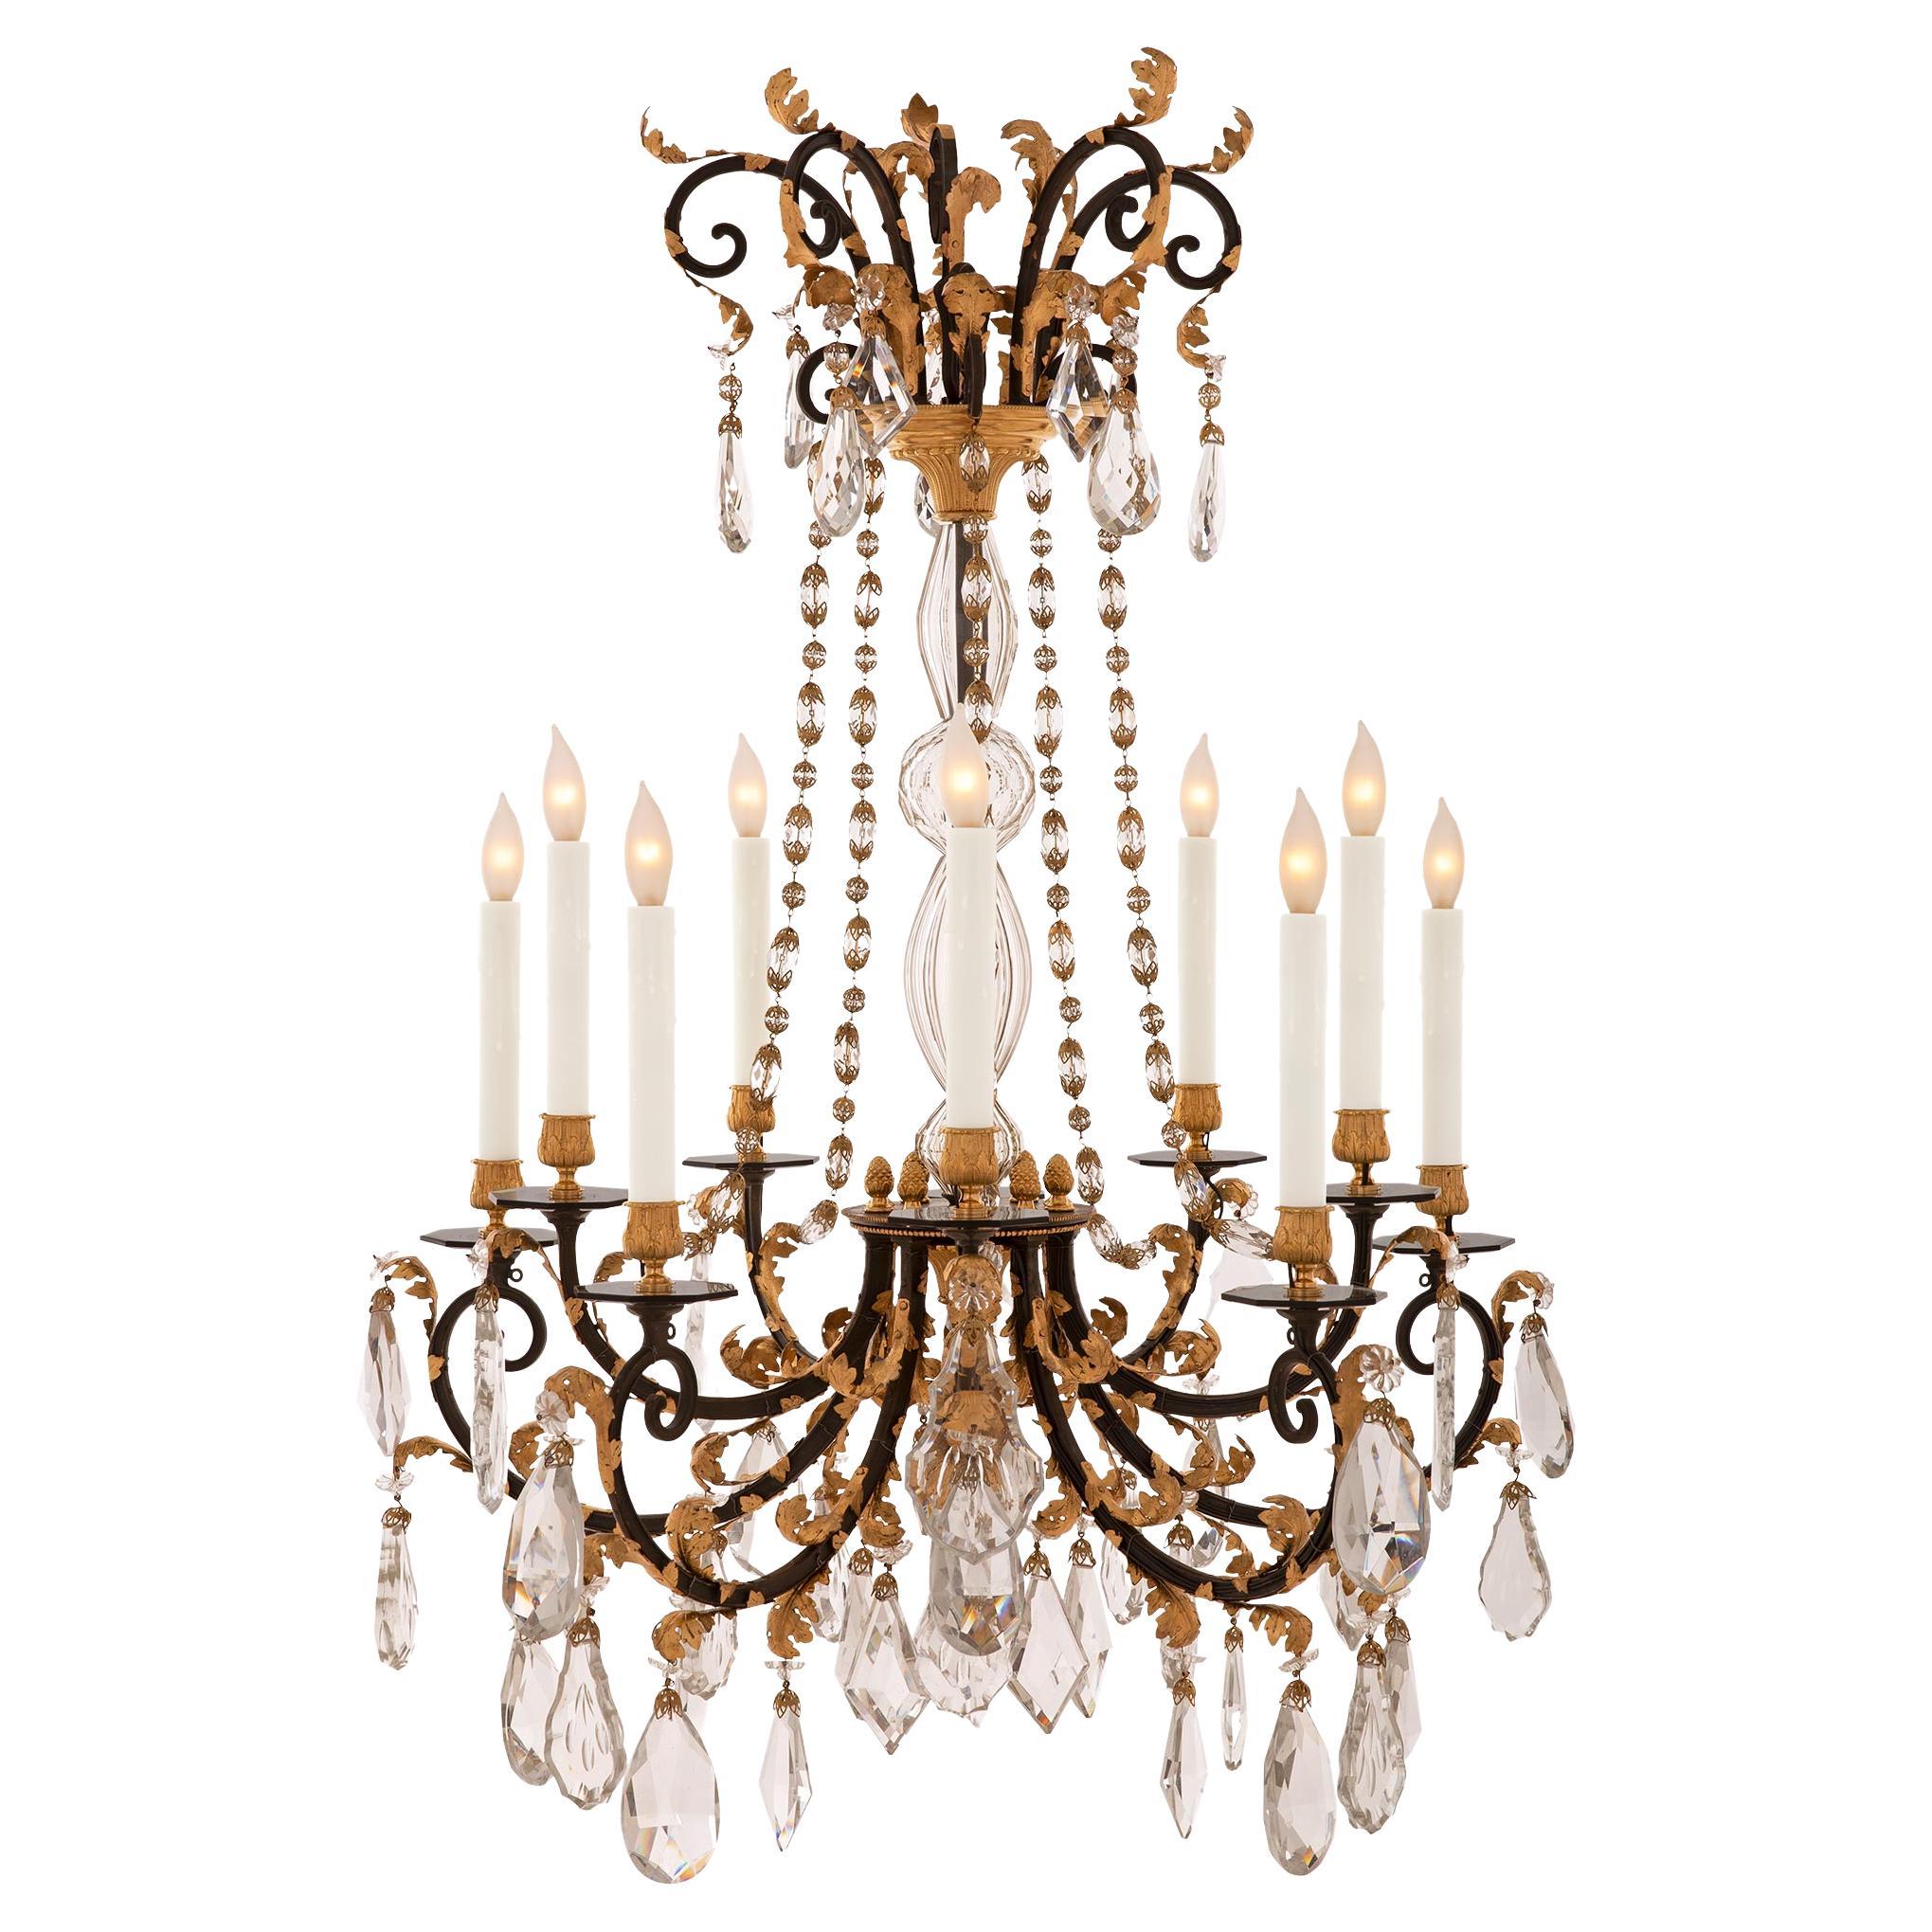 French 19th Century Louis XVI St. Crystal, Ormolu, and Wrought Iron Chandelier For Sale